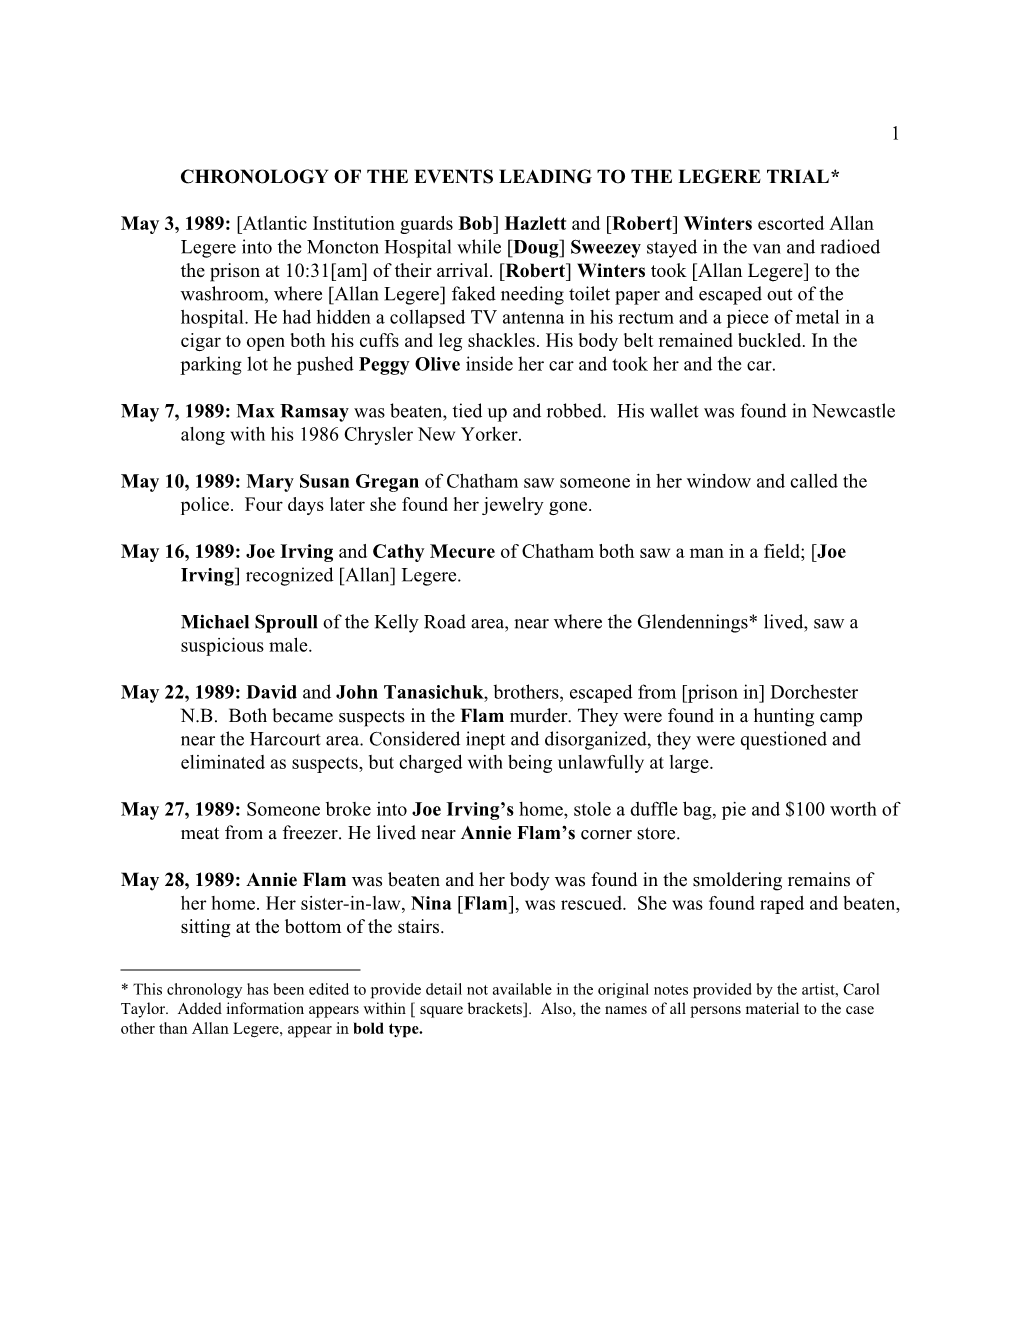 Chronology of the Events of 1989 Leading to the Legere Trial